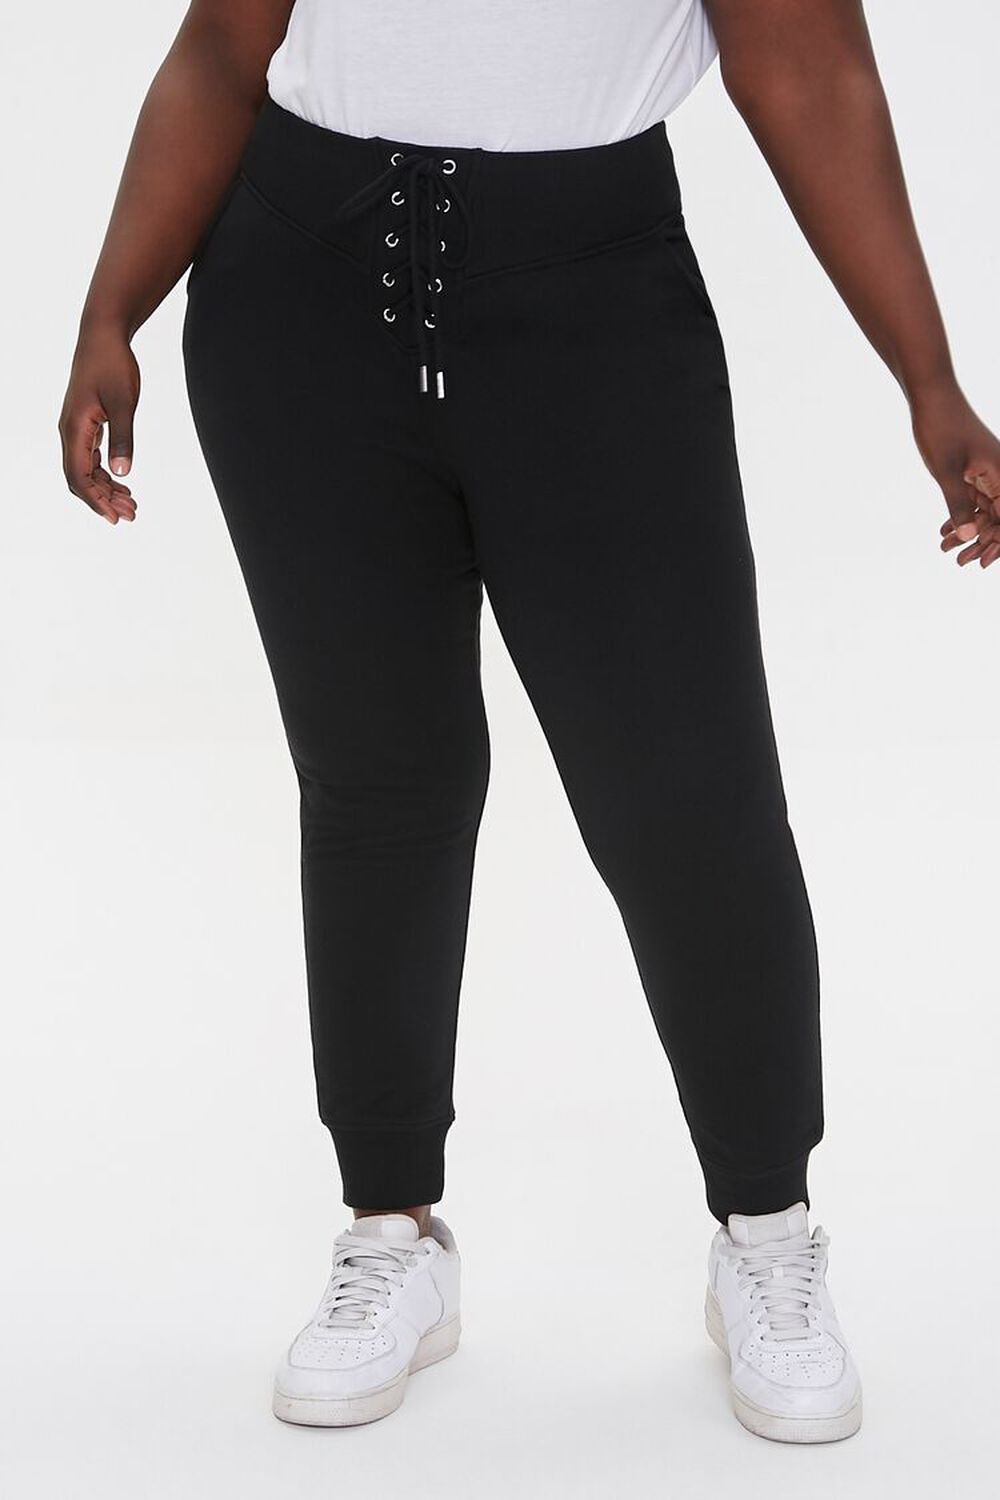 BLACK Plus Size French Terry Joggers, image 2